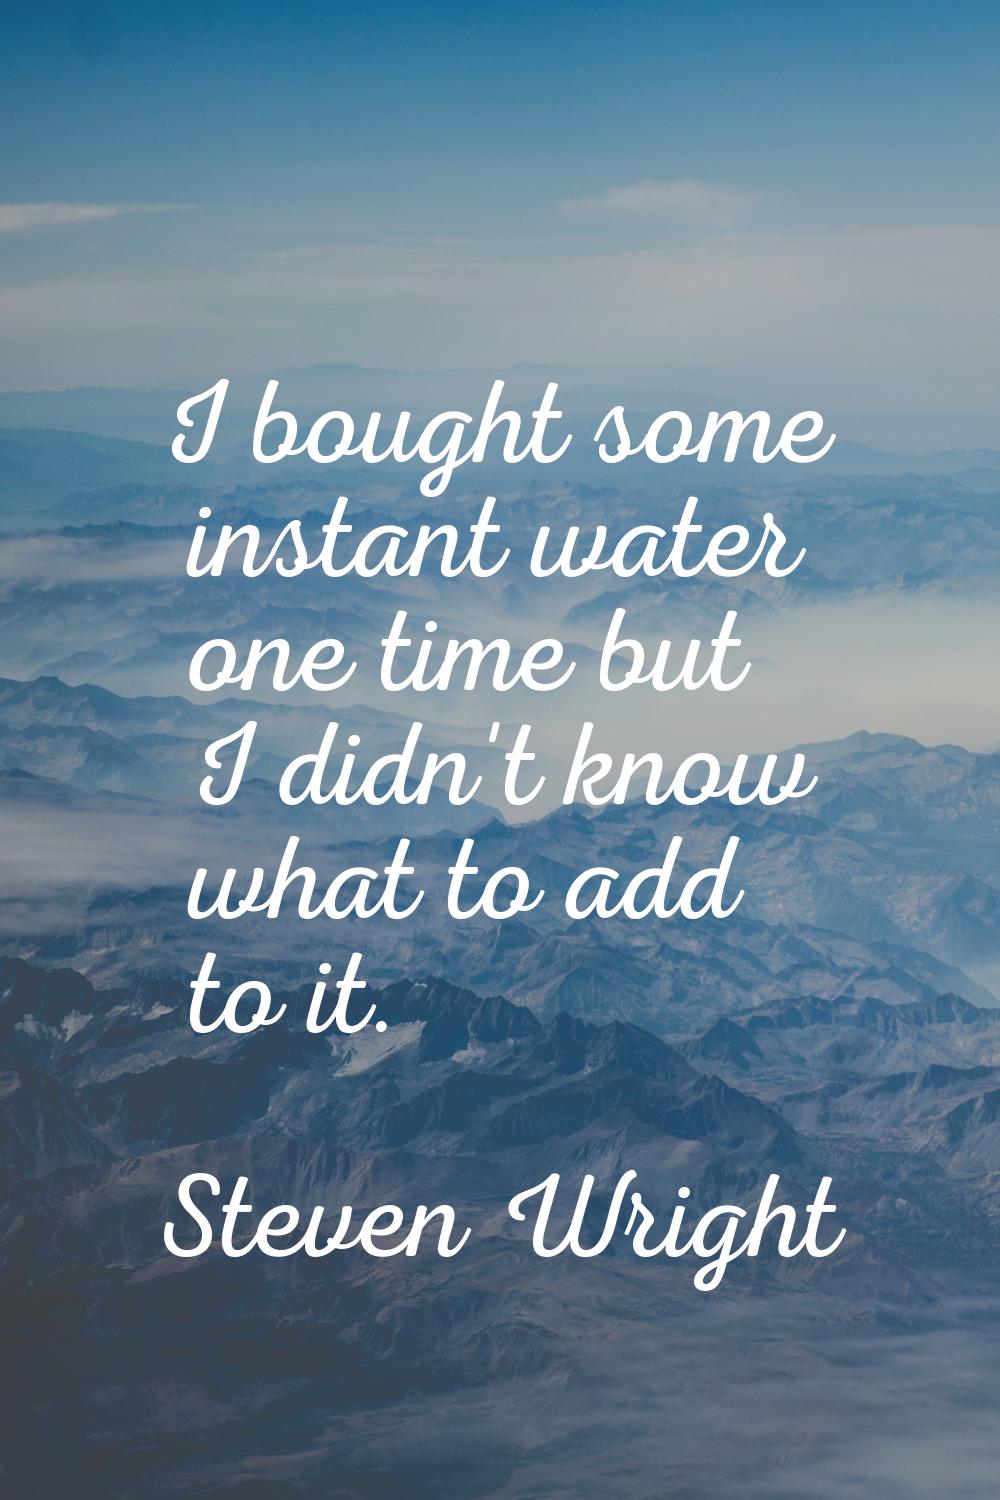 I bought some instant water one time but I didn't know what to add to it.